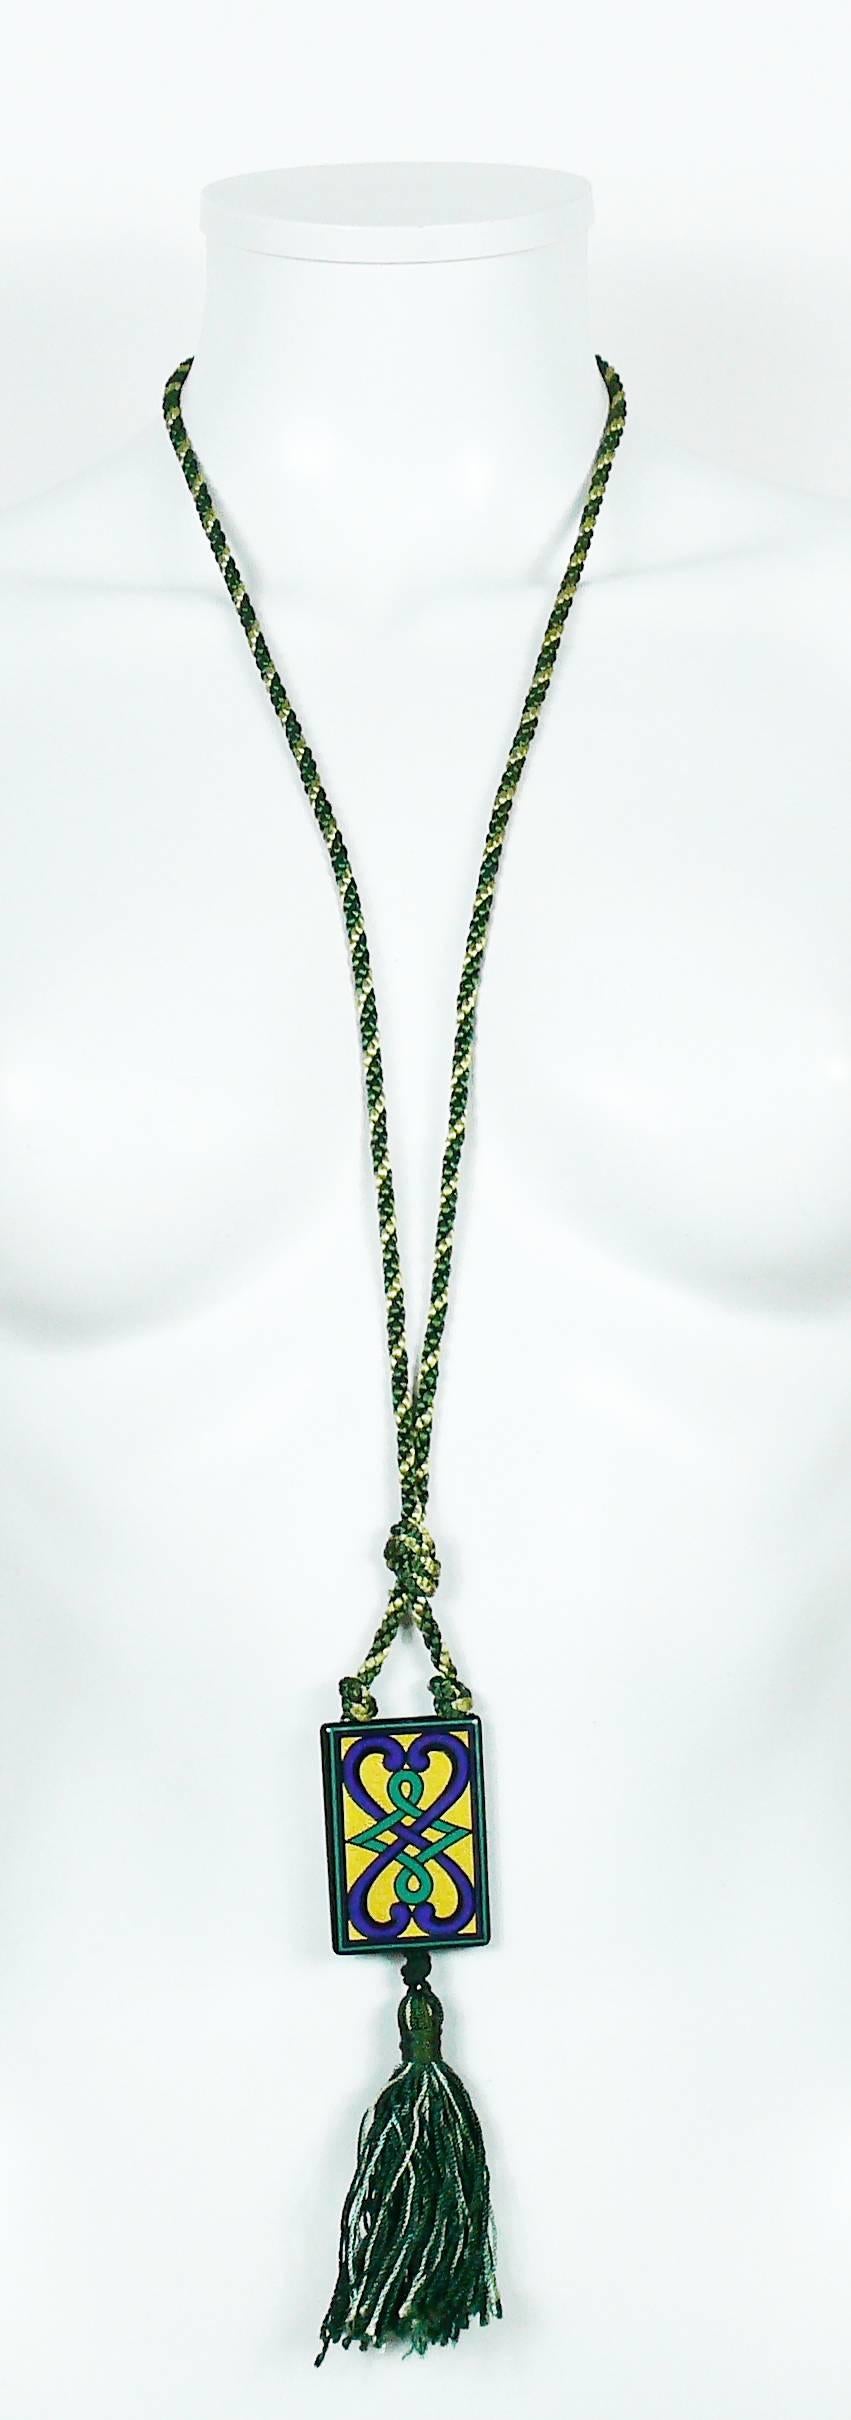 YVES SAINT LAURENT vintage rare passementerie necklace featuring a beautiful rectangular ceramic pendant and a long tassel.

Marked YSL.

Indicative measurements : length worn (incl. tassel) approx. 48 cm (18.90 inches).

JEWELRY CONDITION CHART
-